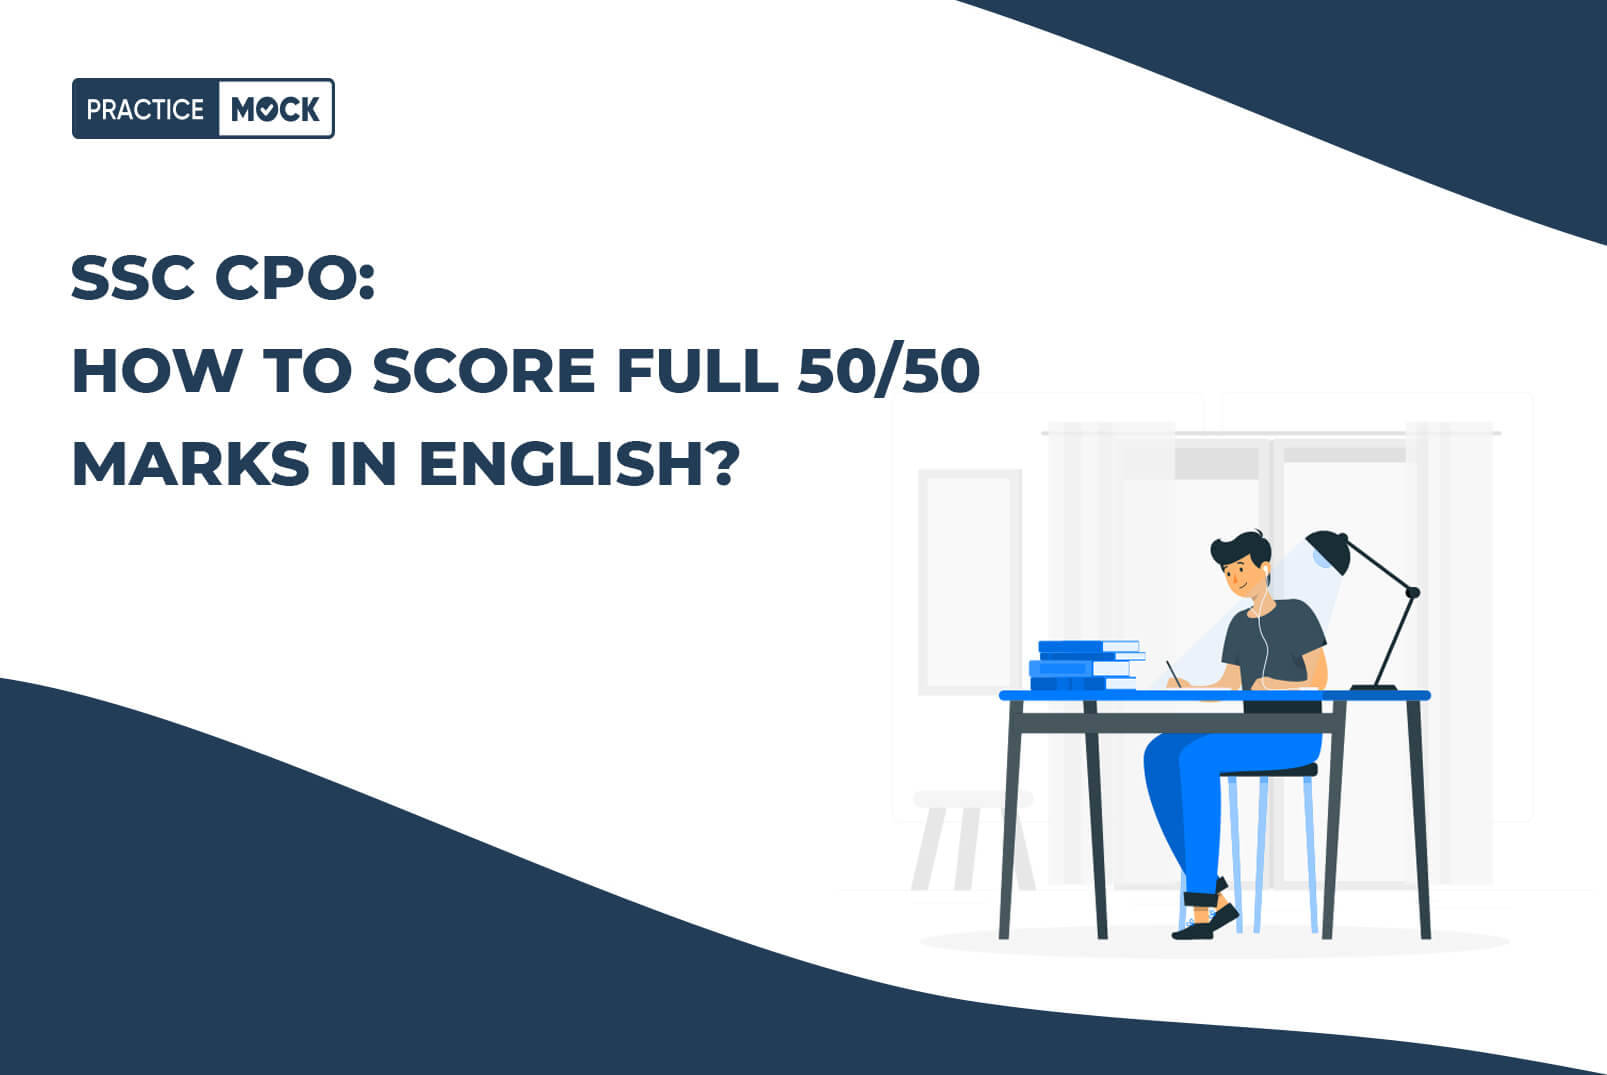 SSC CPO How to Score Full 5050 Marks in English